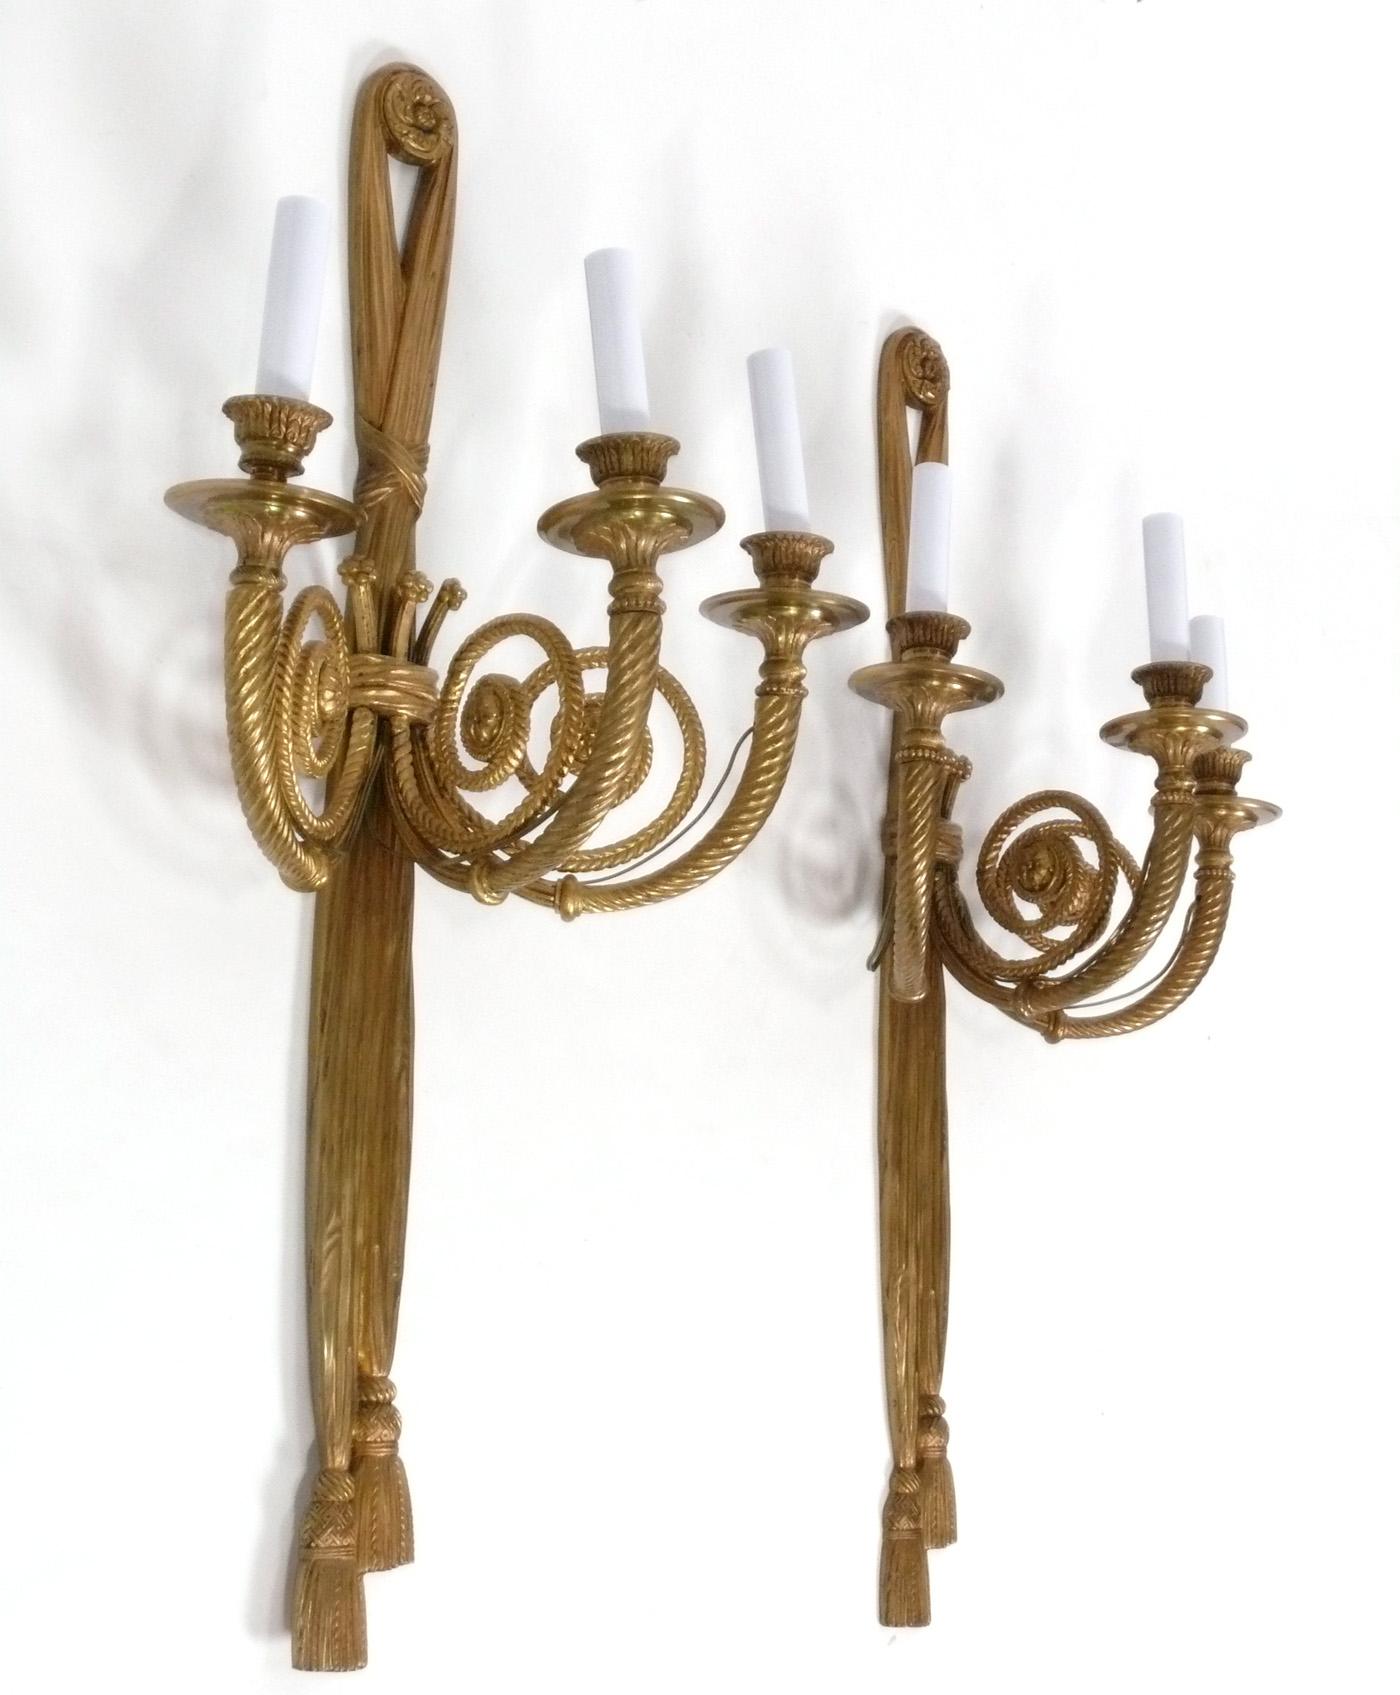 Pair of Elegant Brass or Bronze Sconces, attributed to the E.F. Caldwell Company, American, circa 1940s. They retain their warm original patina. They have been rewired and are ready to mount. 